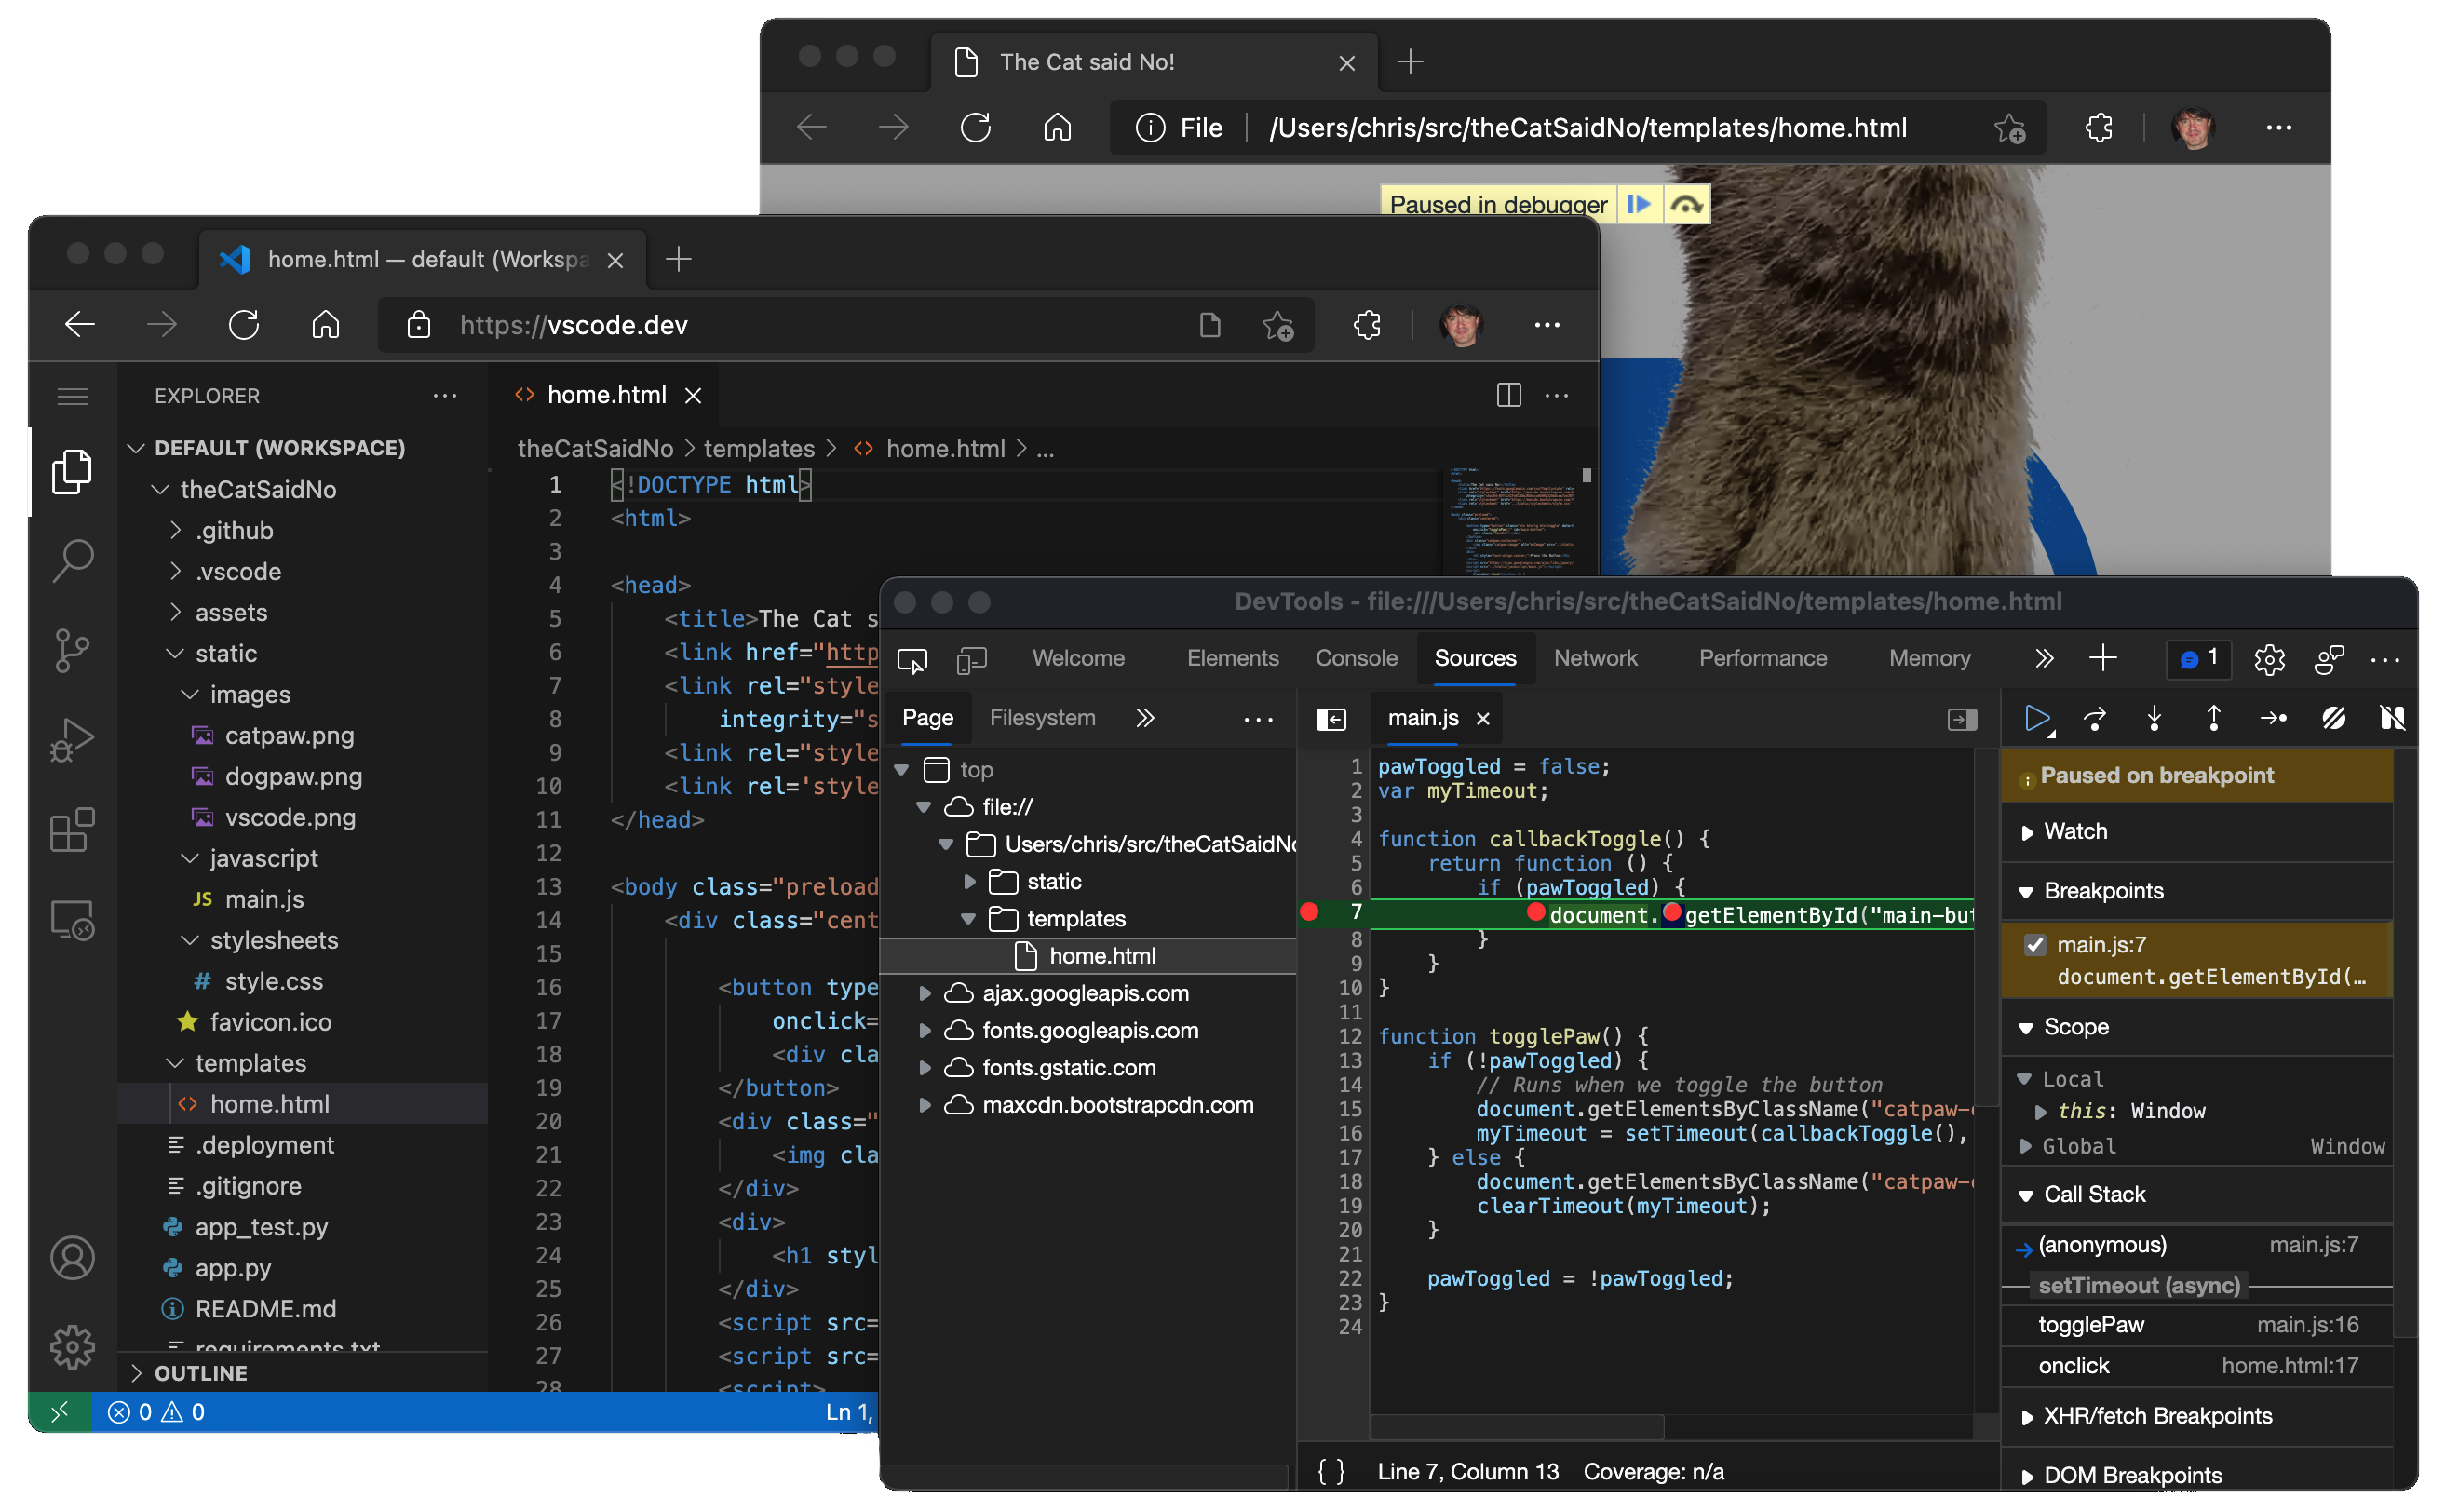 "The Cat said No" application source code in vscode.dev